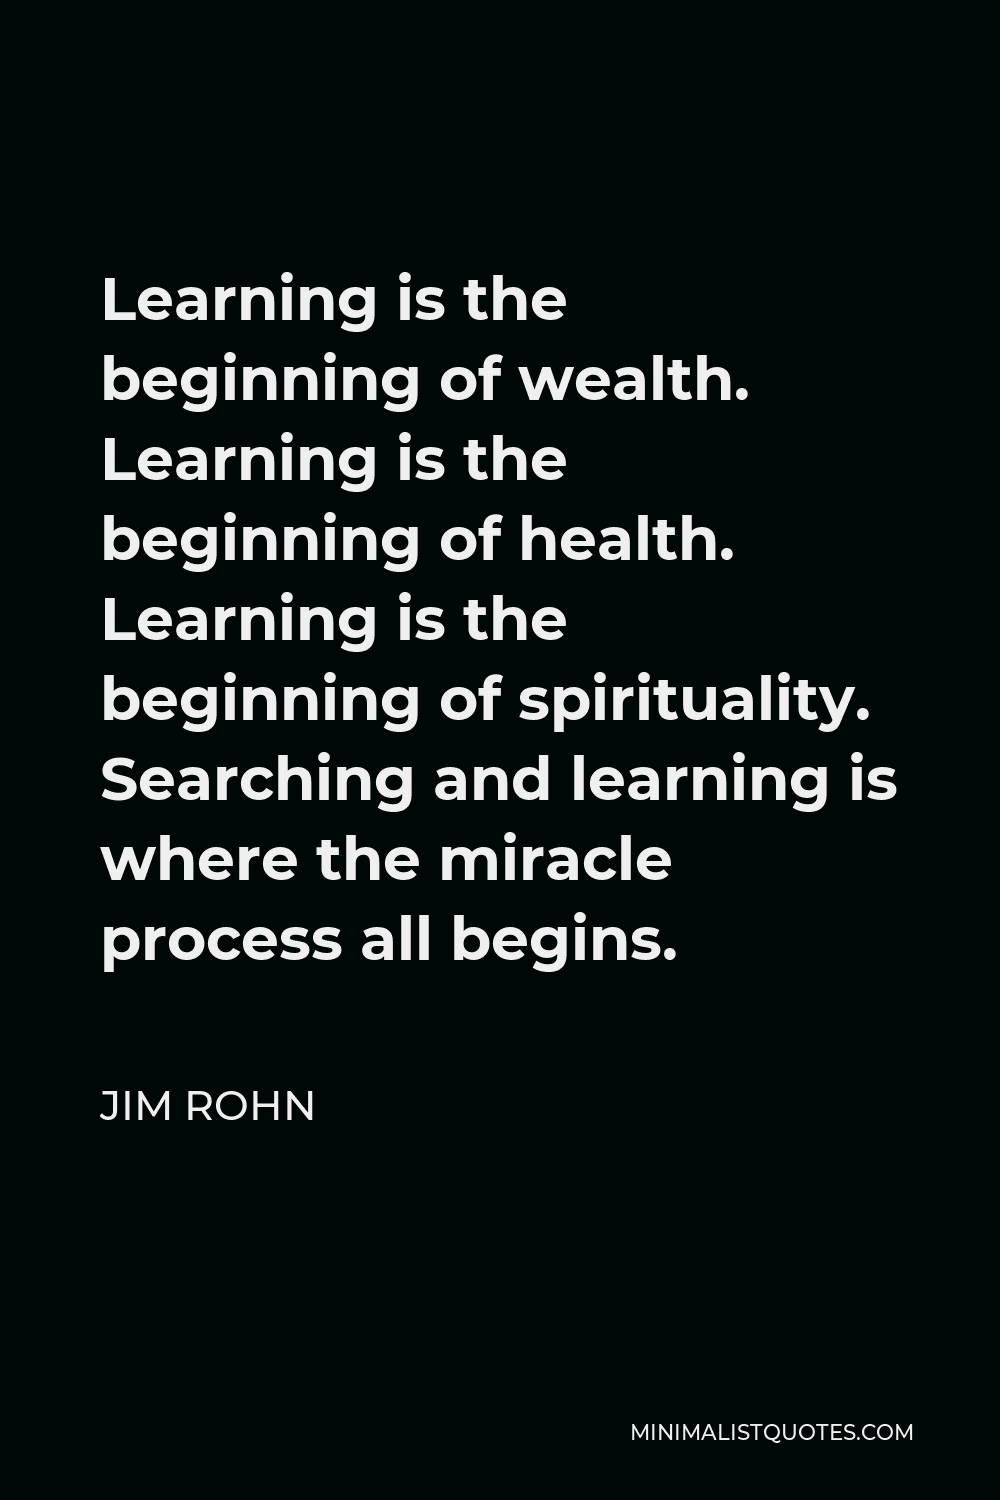 Jim Rohn Quote - Learning is the beginning of wealth. Learning is the beginning of health. Learning is the beginning of spirituality. Searching and learning is where the miracle process all begins.